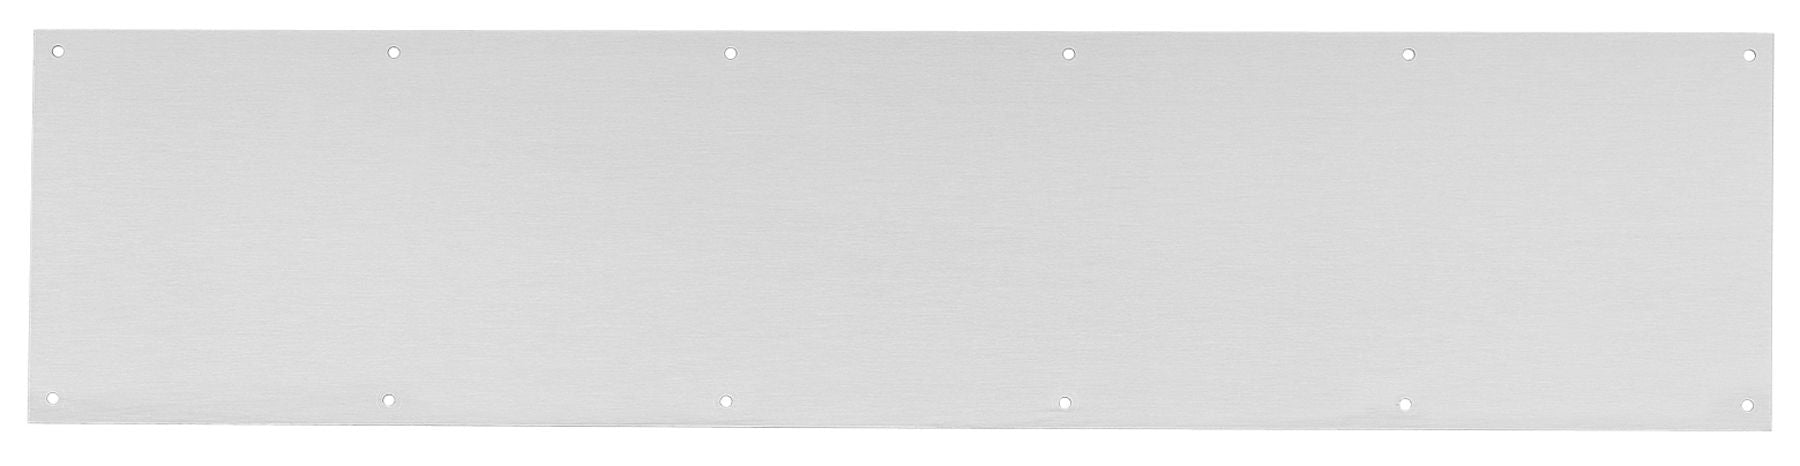 Ives Commercial 840032D832 8" x 32" Kick Plate Satin Stainless Steel Finish